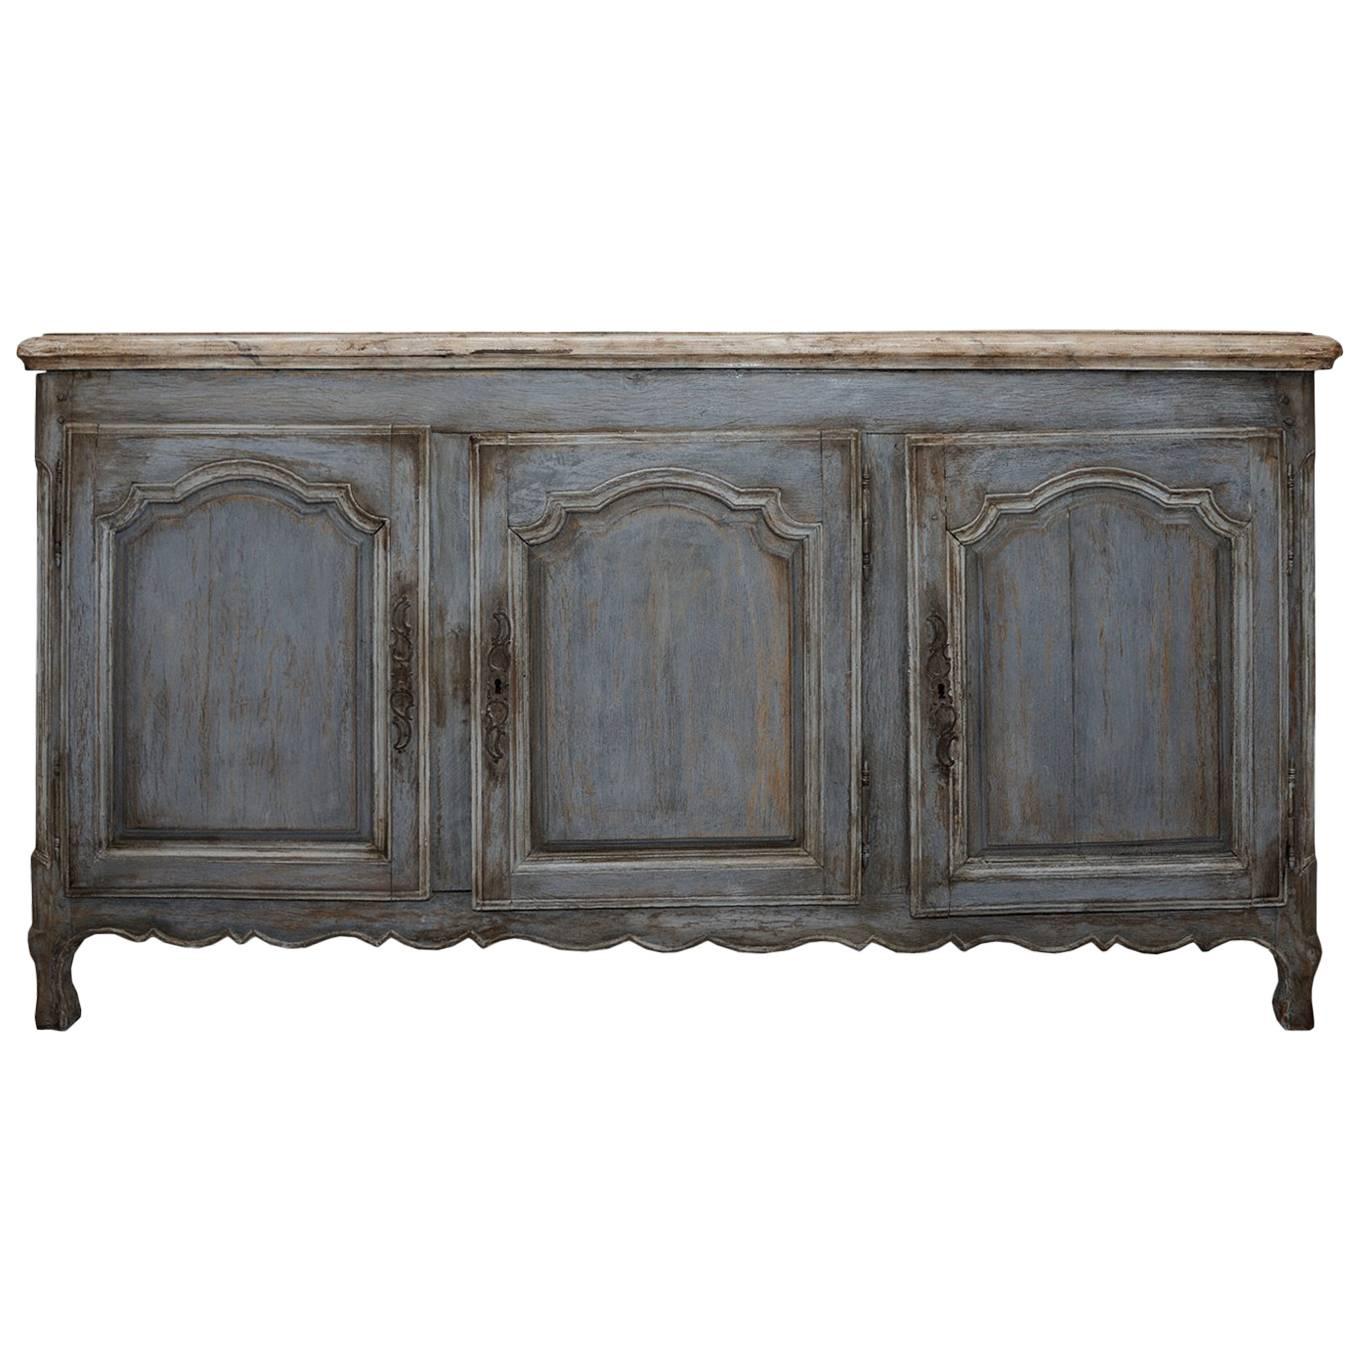 French Mid-19th Century Louis XV Painted Three-Door Enfilade Dresser, circa 1750 For Sale